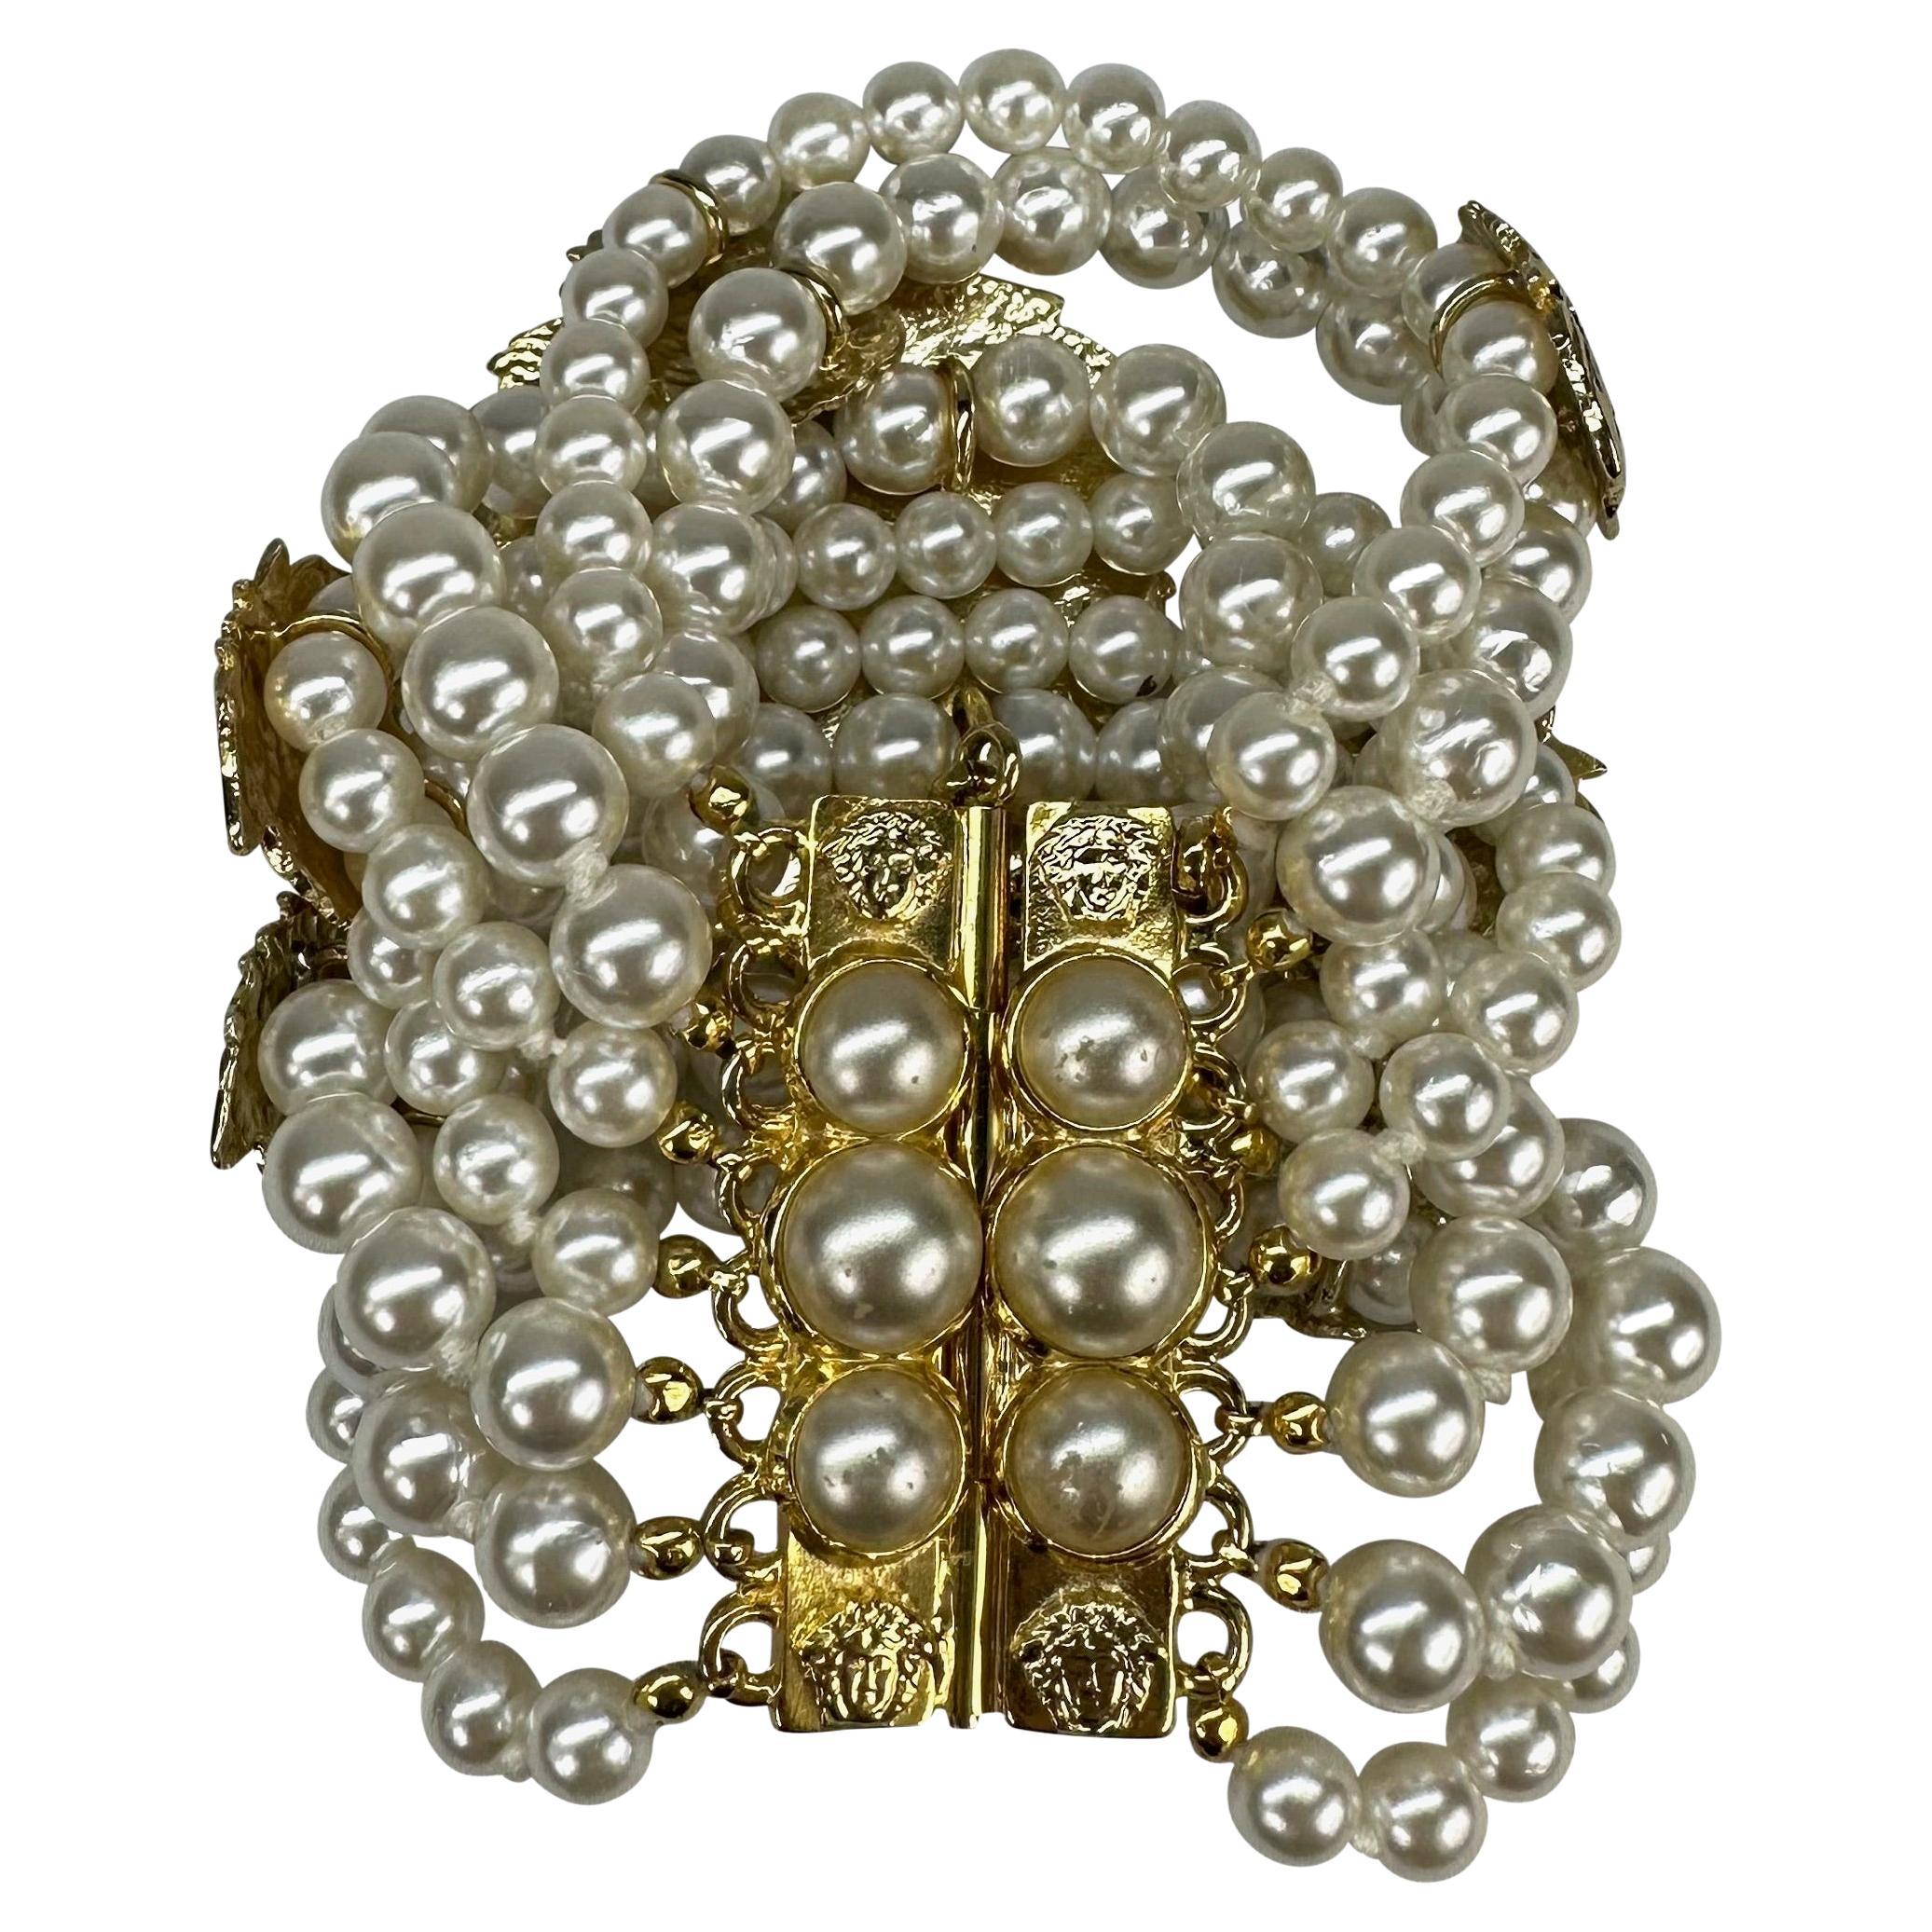 F/W 1994 Gianni Versace Runway Medusa Costume Pearl Gold Bracelet  In Good Condition For Sale In West Hollywood, CA